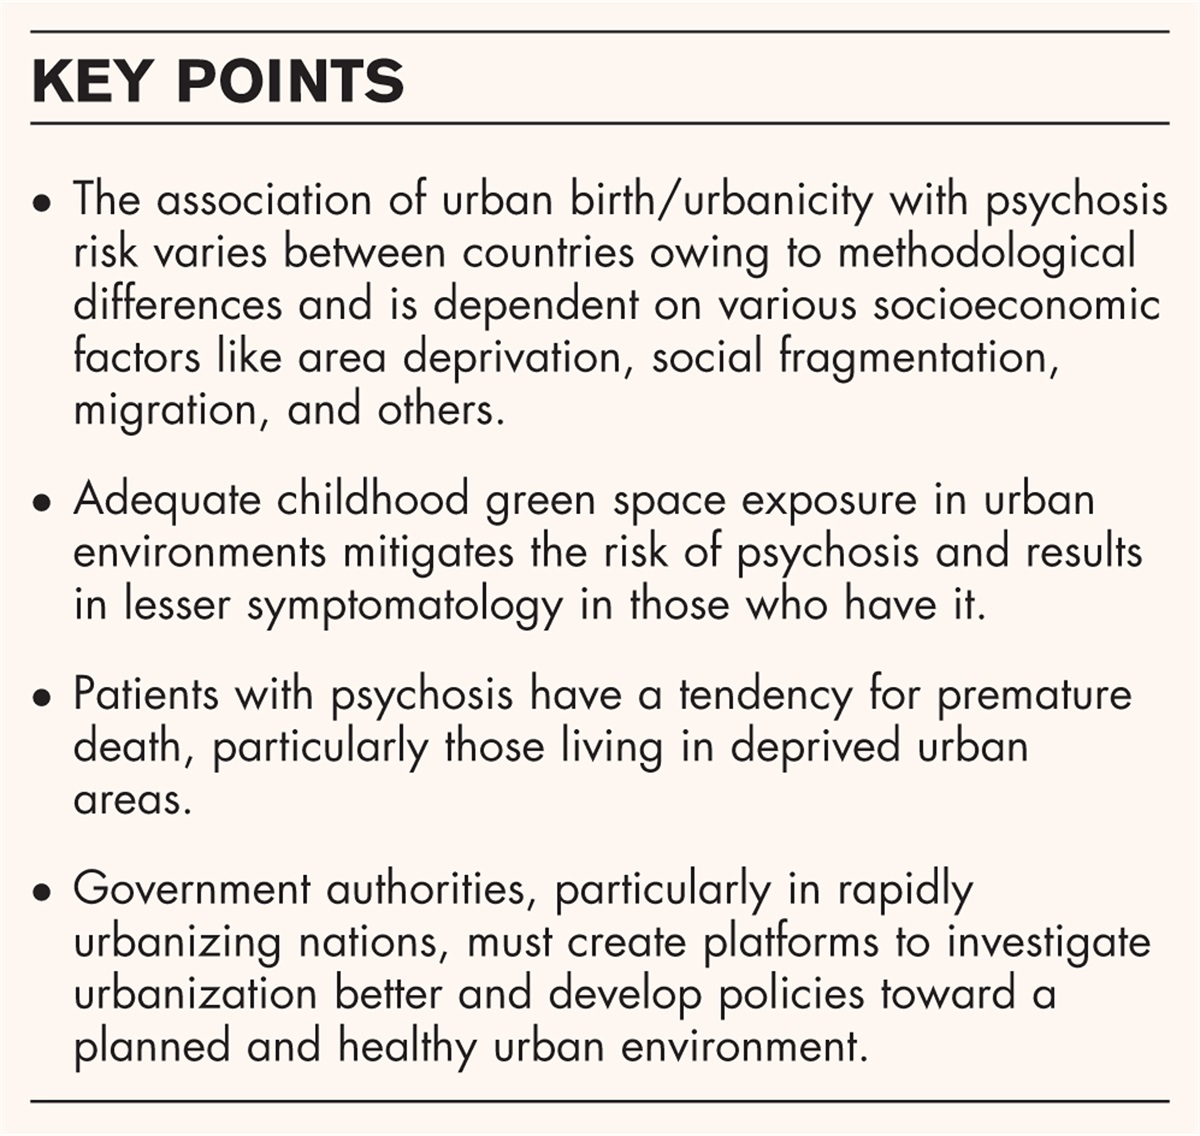 Urbanization and psychosis: an update of recent evidence